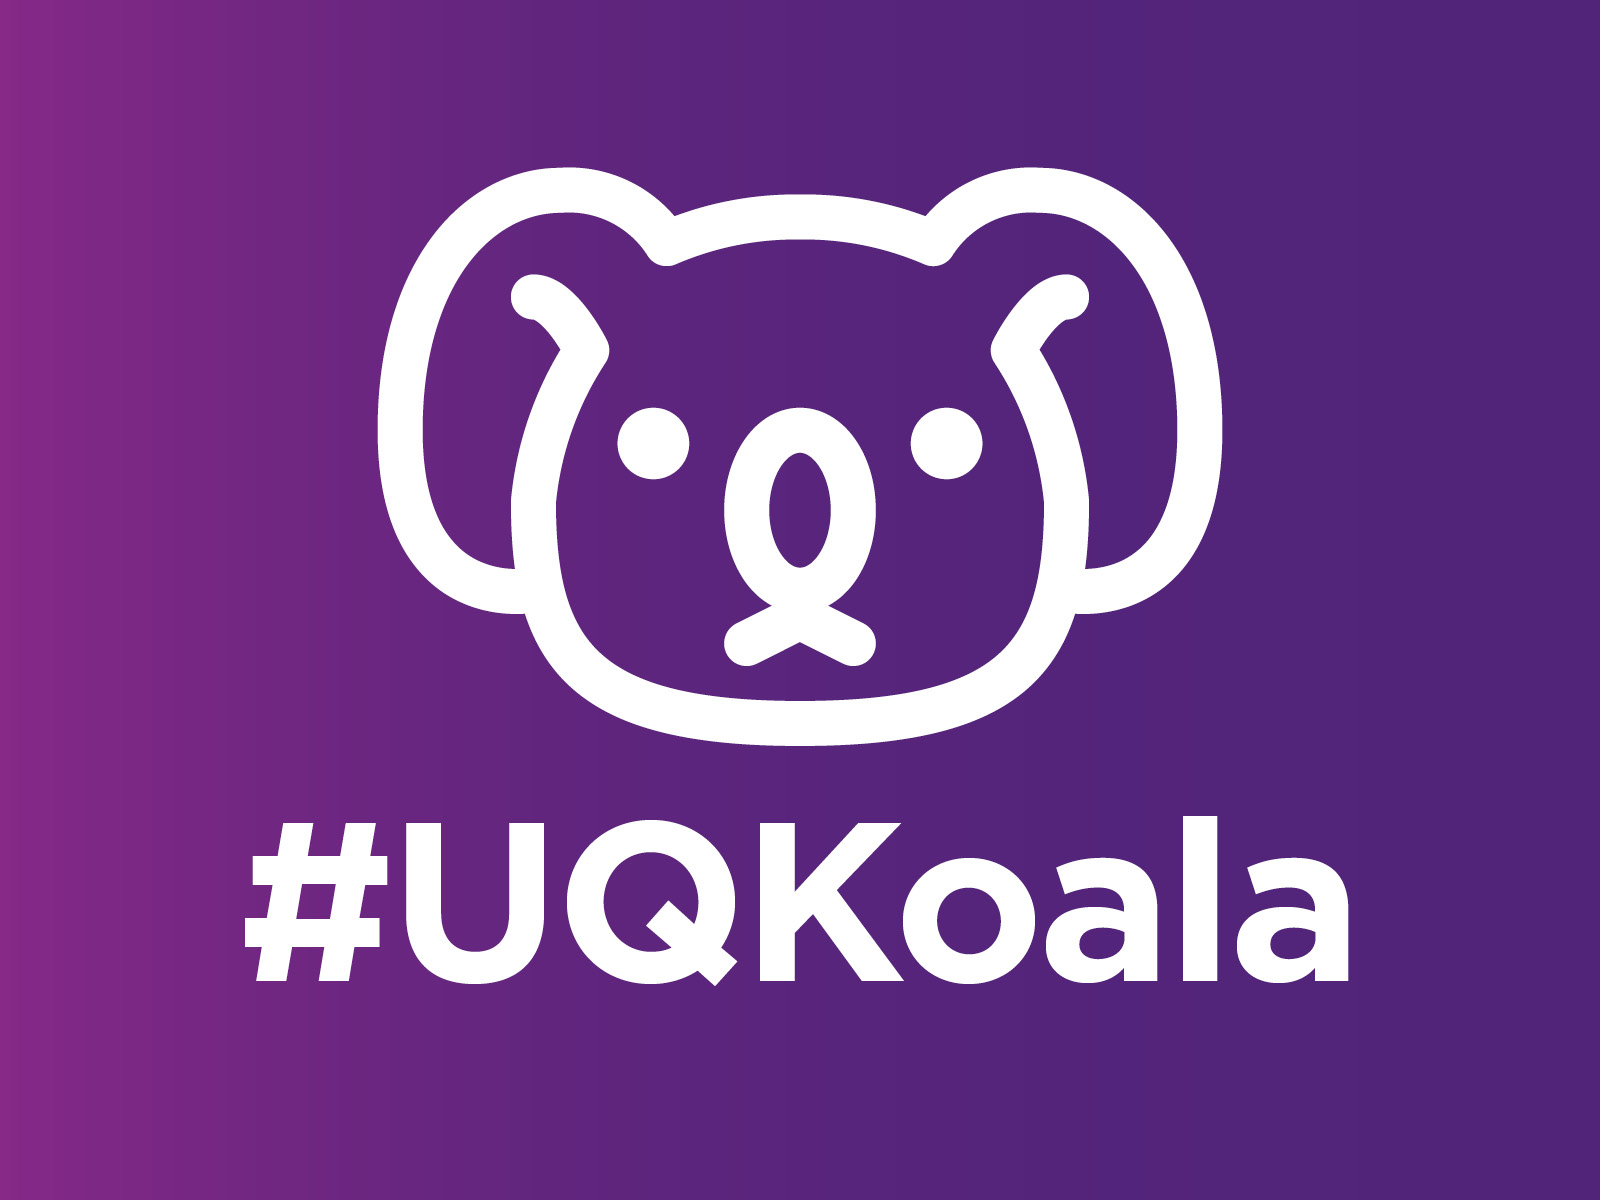 An icon showing a koala's face on a purple background with the text "#UQKoala" underneath